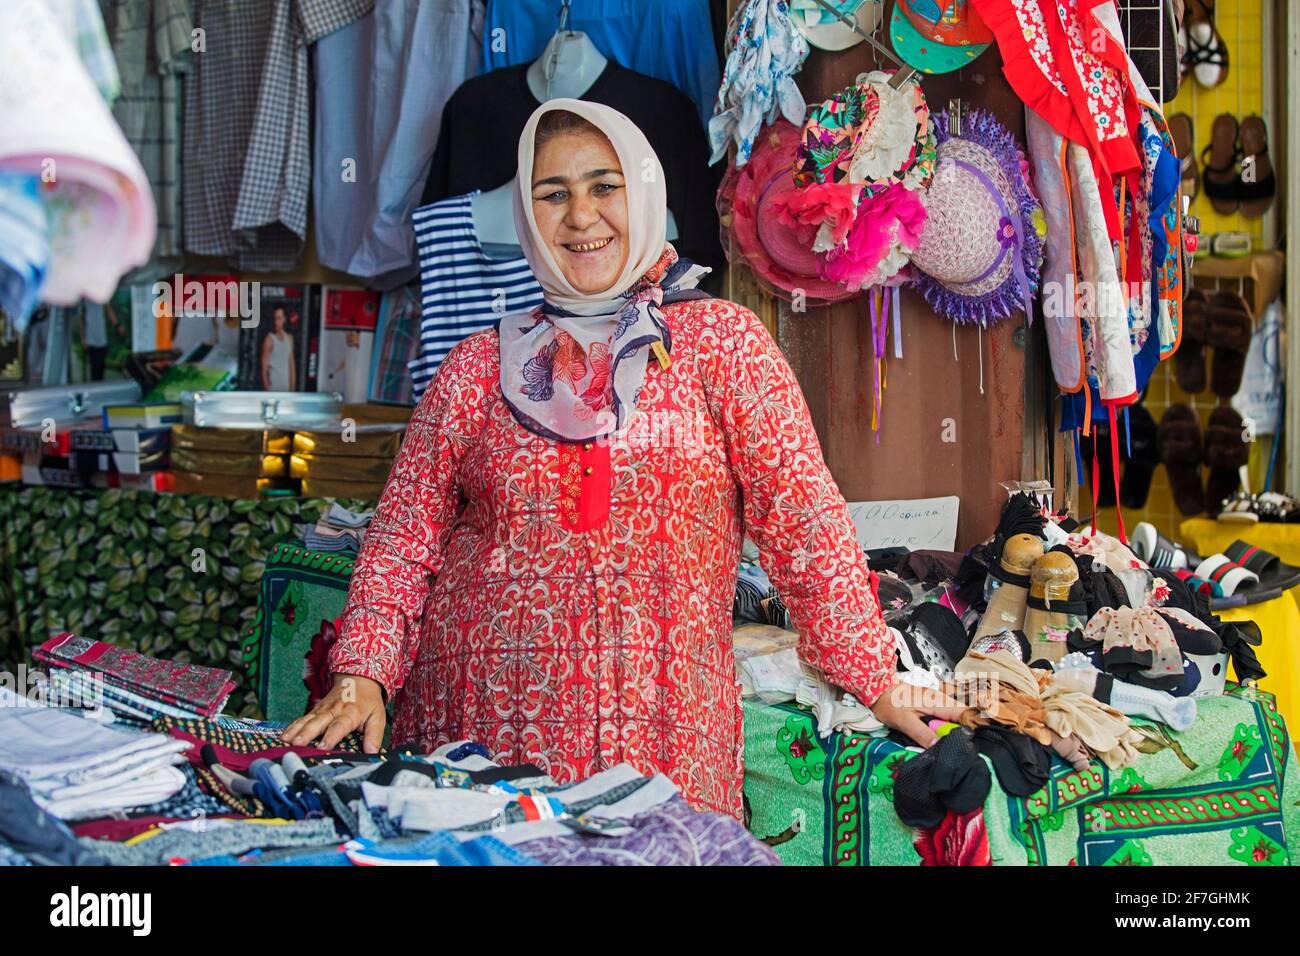 Kyrgyz woman with golden teeth selling clothes at market in the city Osh, Kyrgyzstan Stock Photo